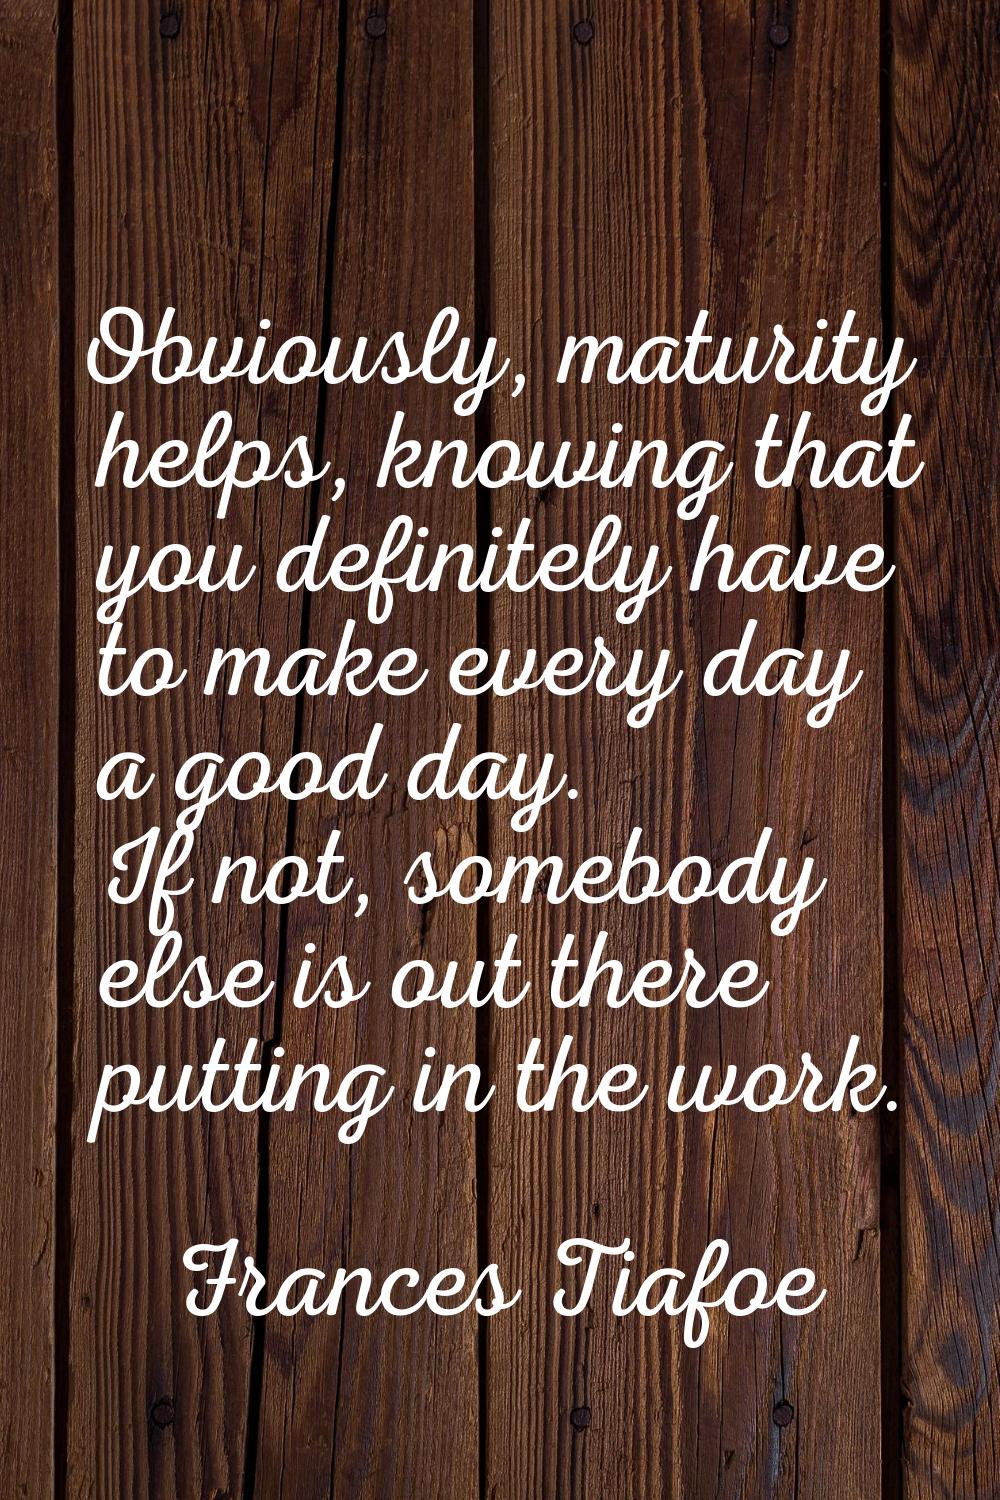 Obviously, maturity helps, knowing that you definitely have to make every day a good day. If not, s